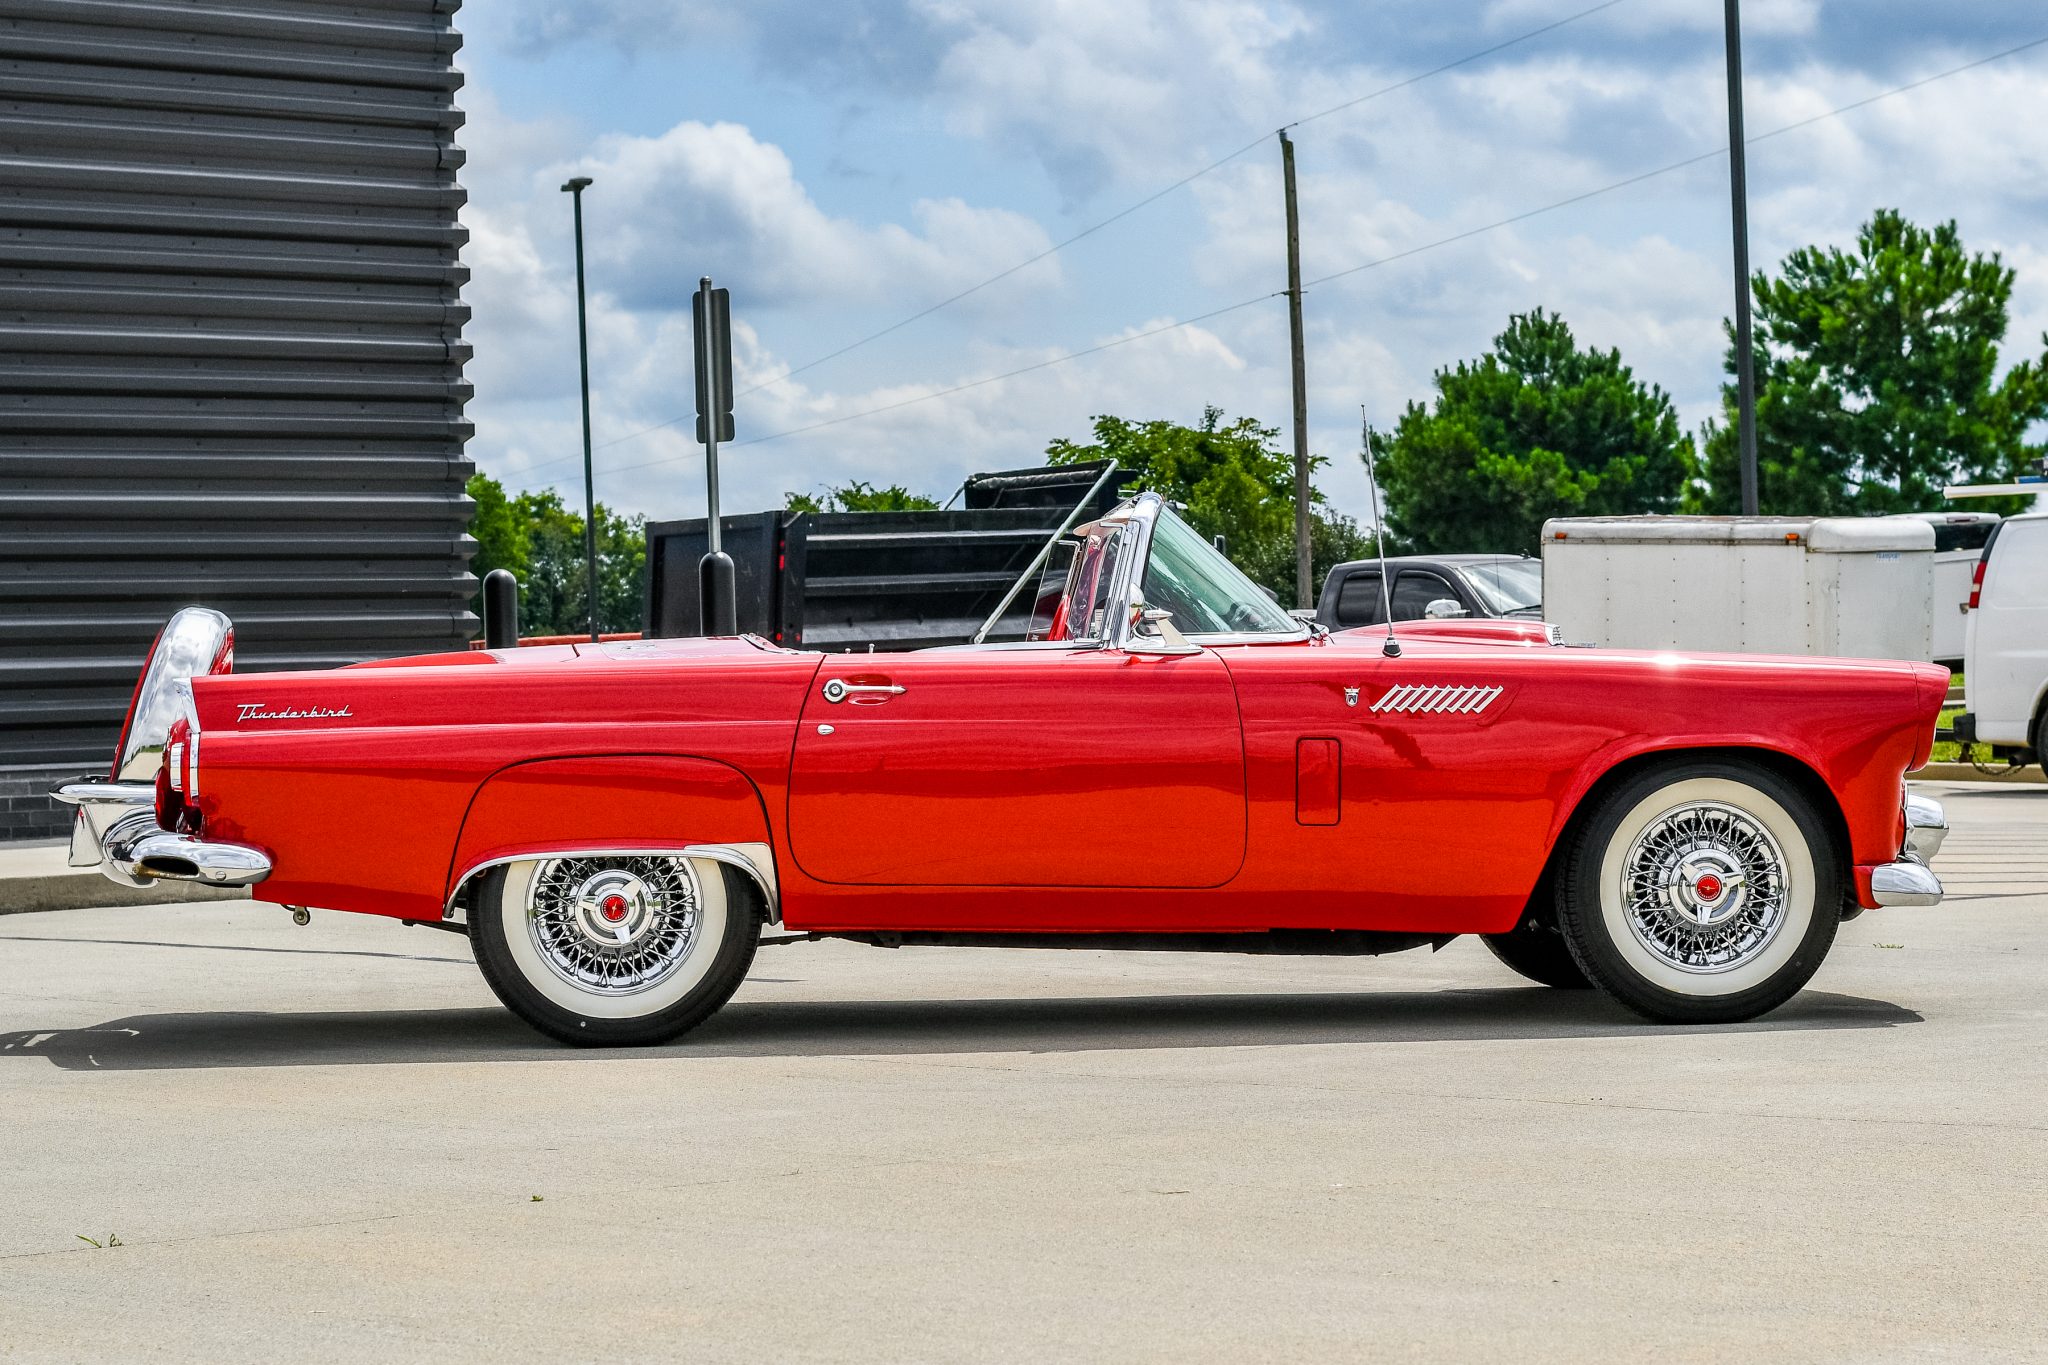 1956 Ford Thunderbird Side View Torch Red.